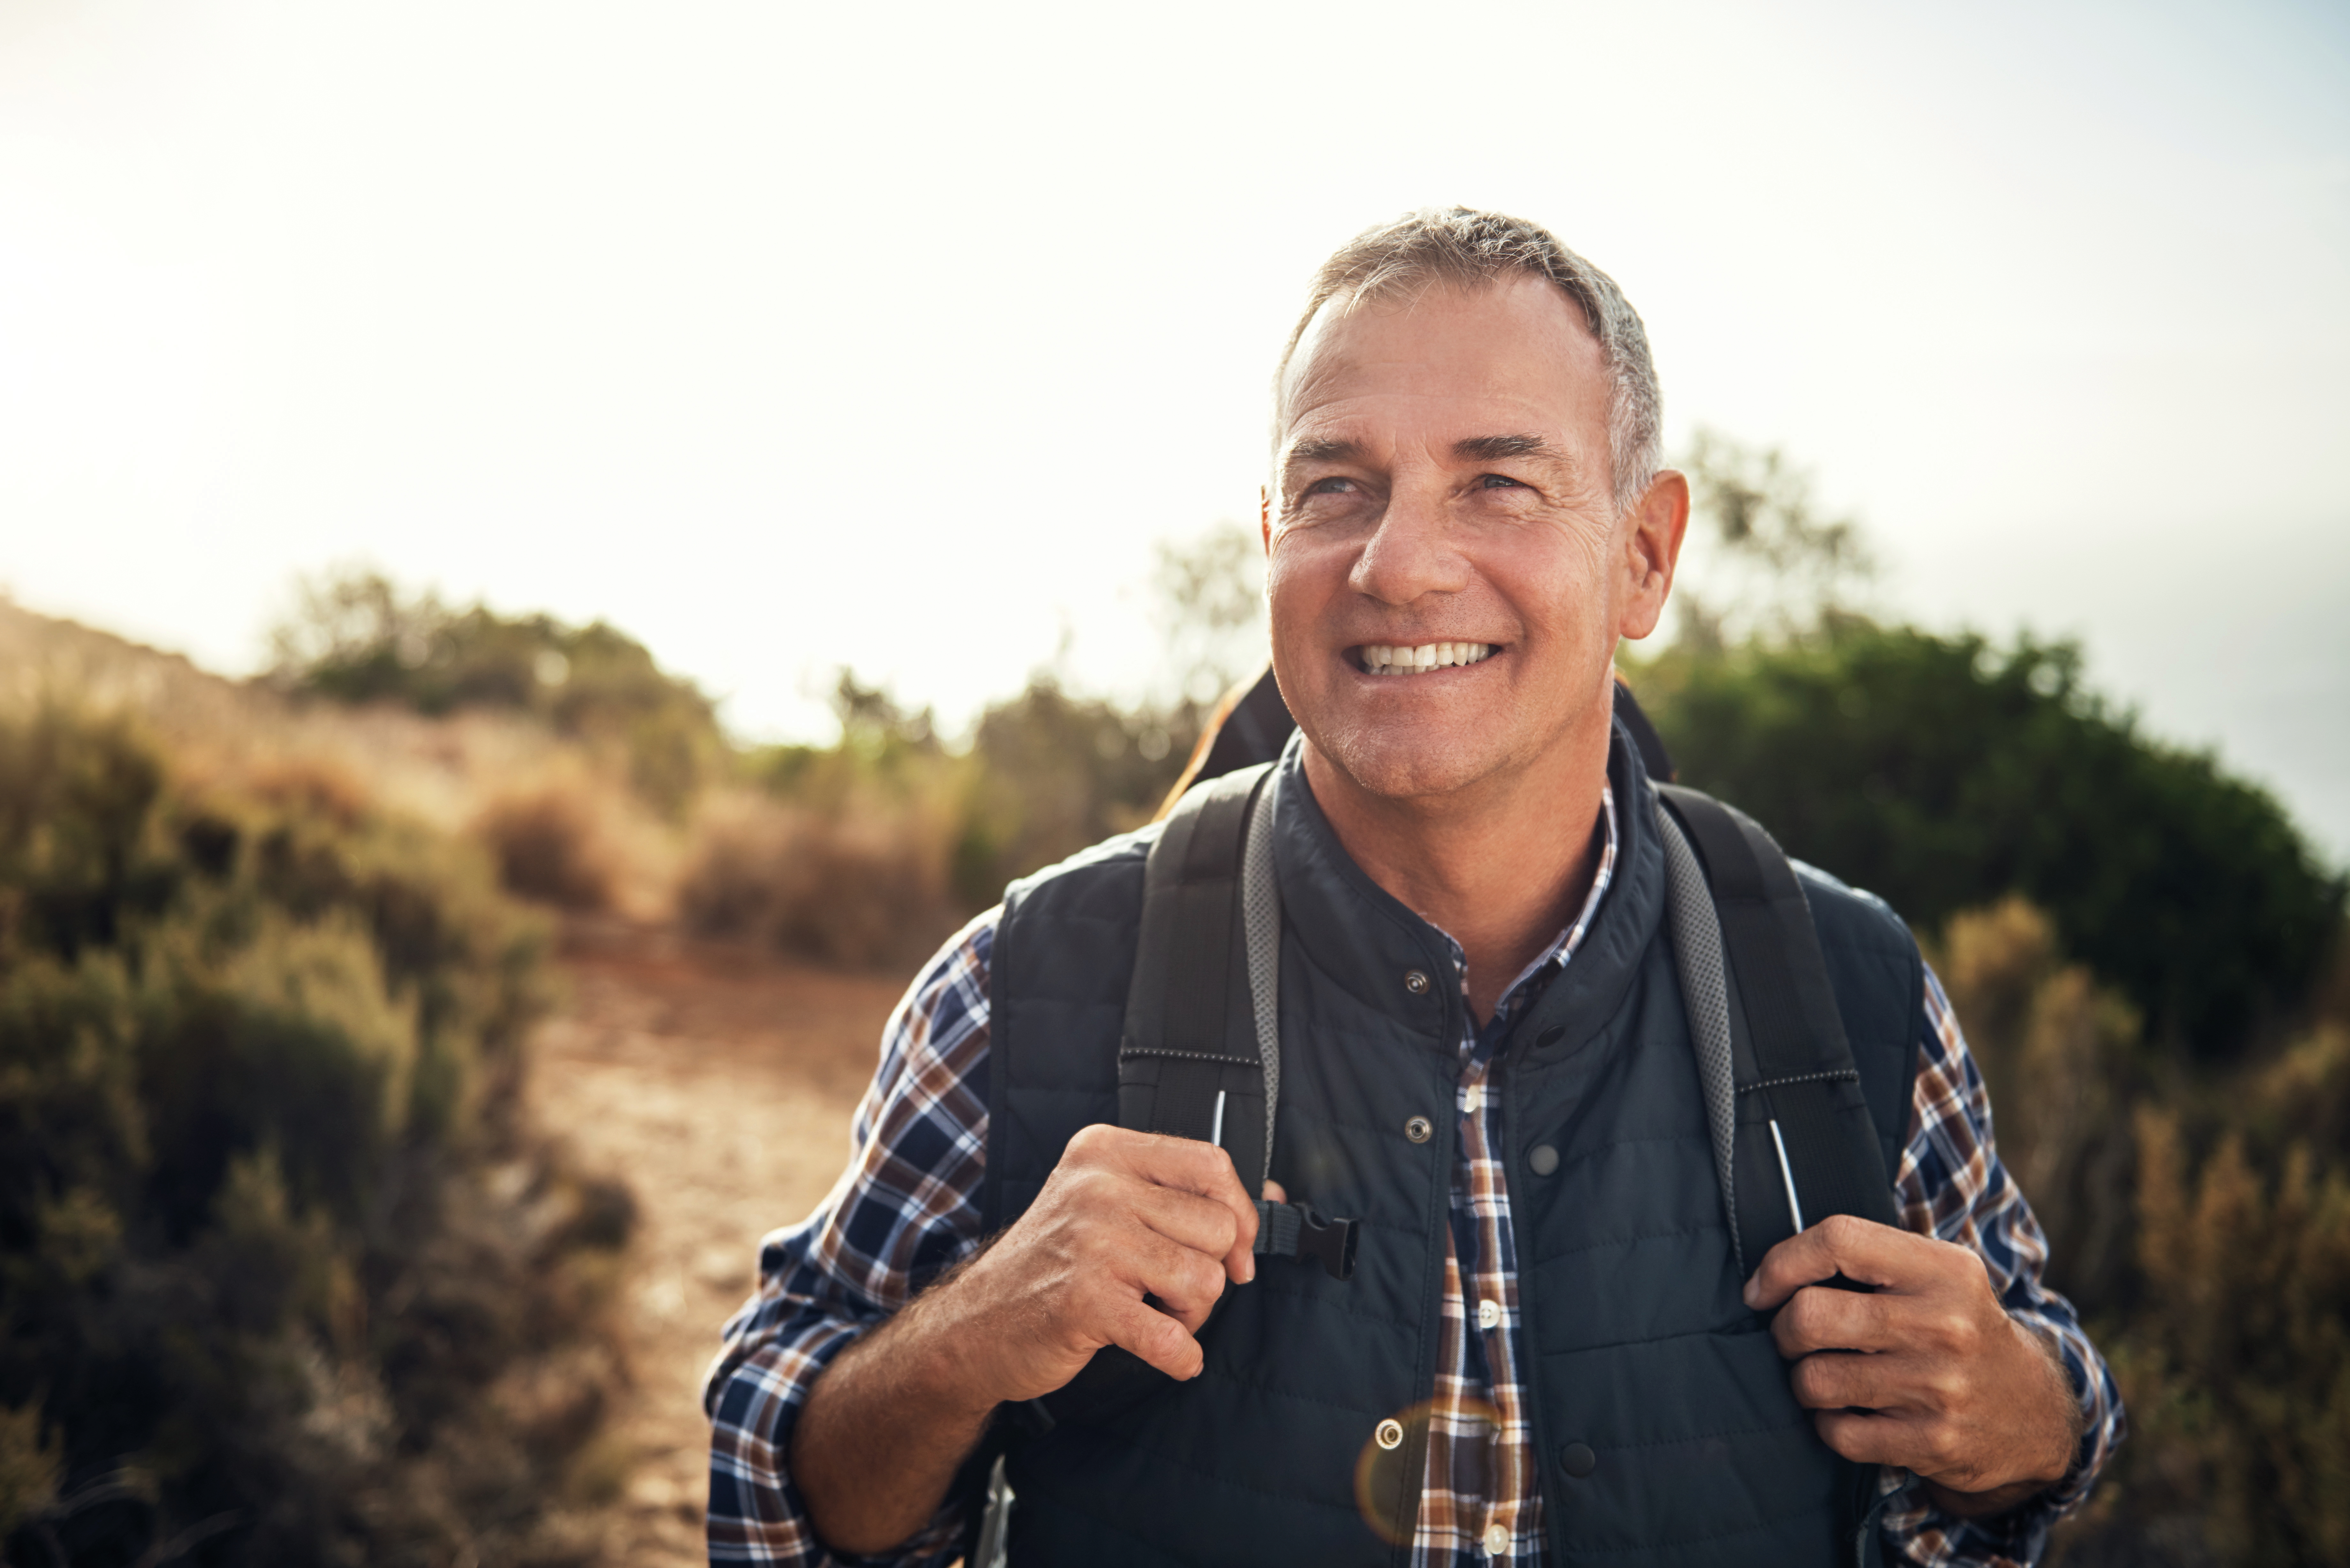 A man with gray hair wears a backpack on a hike.